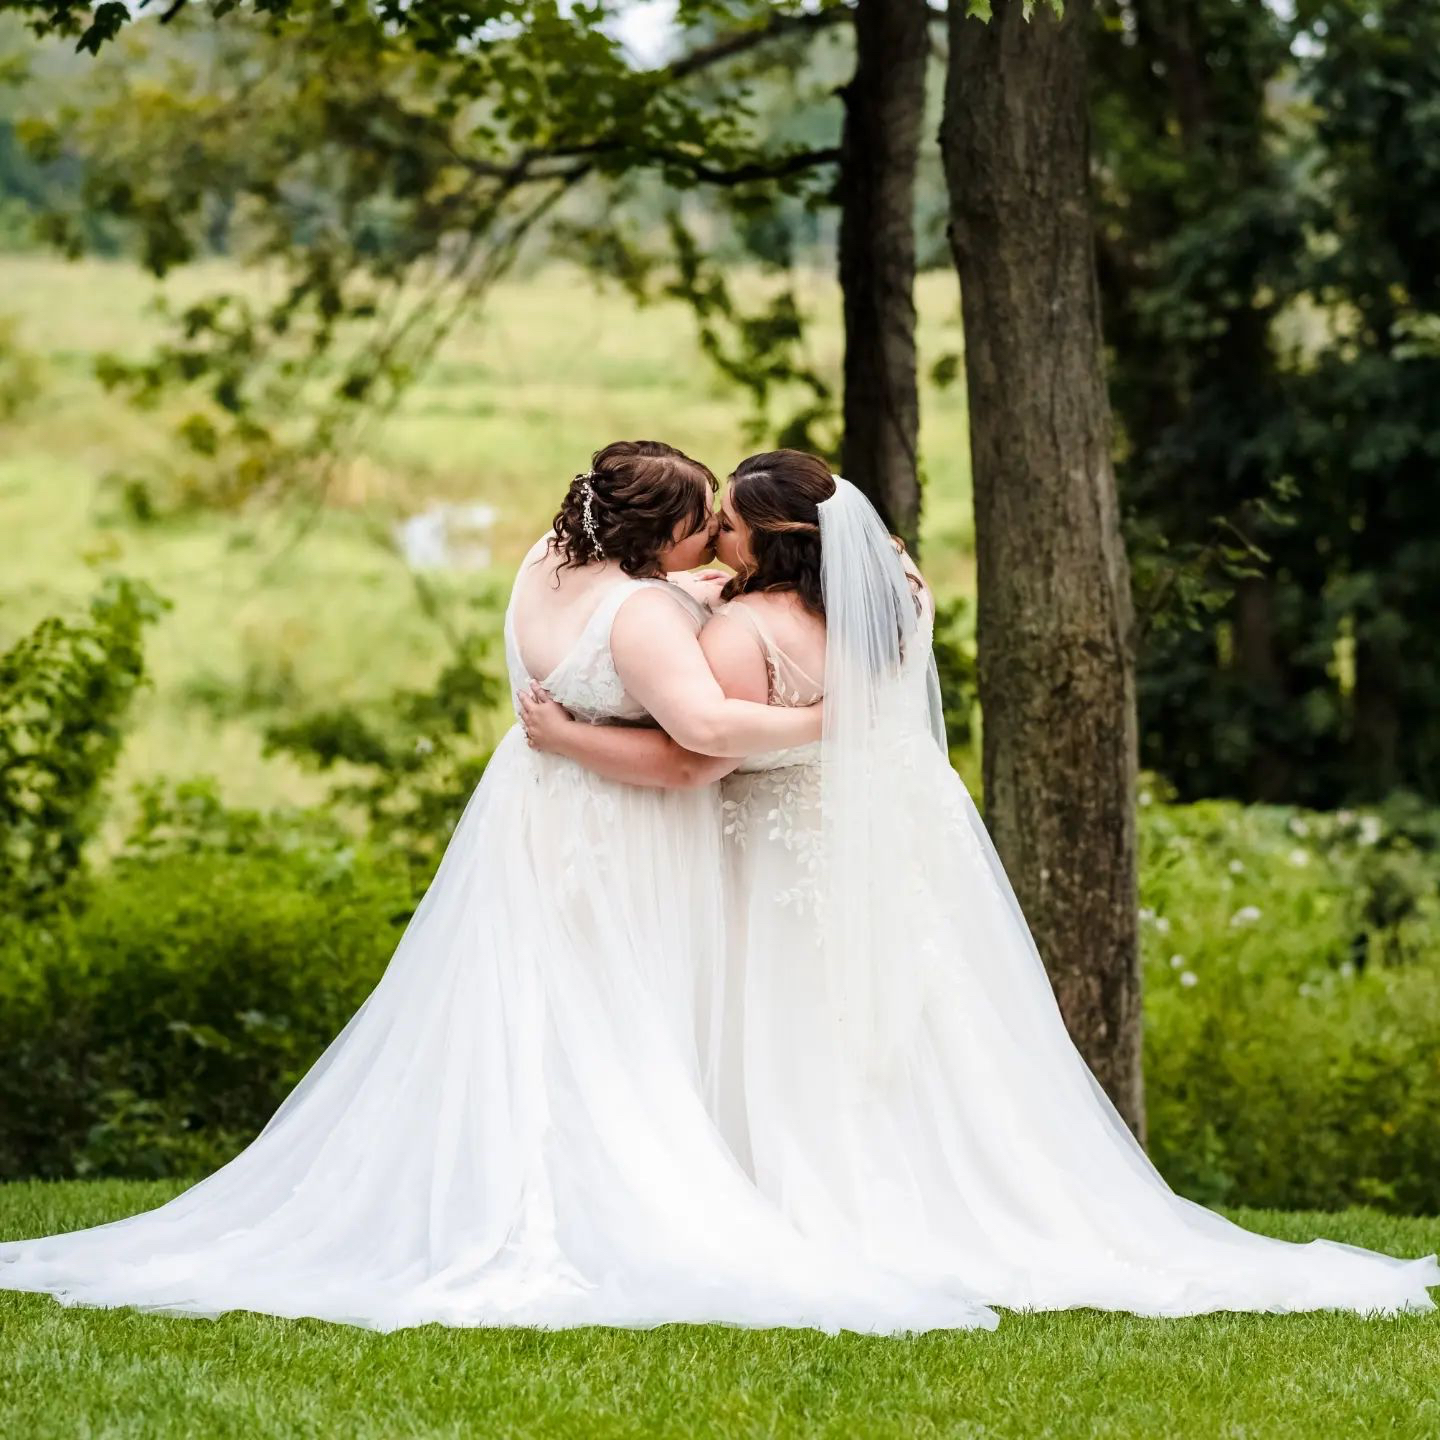 How to Plan An LGBTQ+ Wedding: Start With the Right Venue